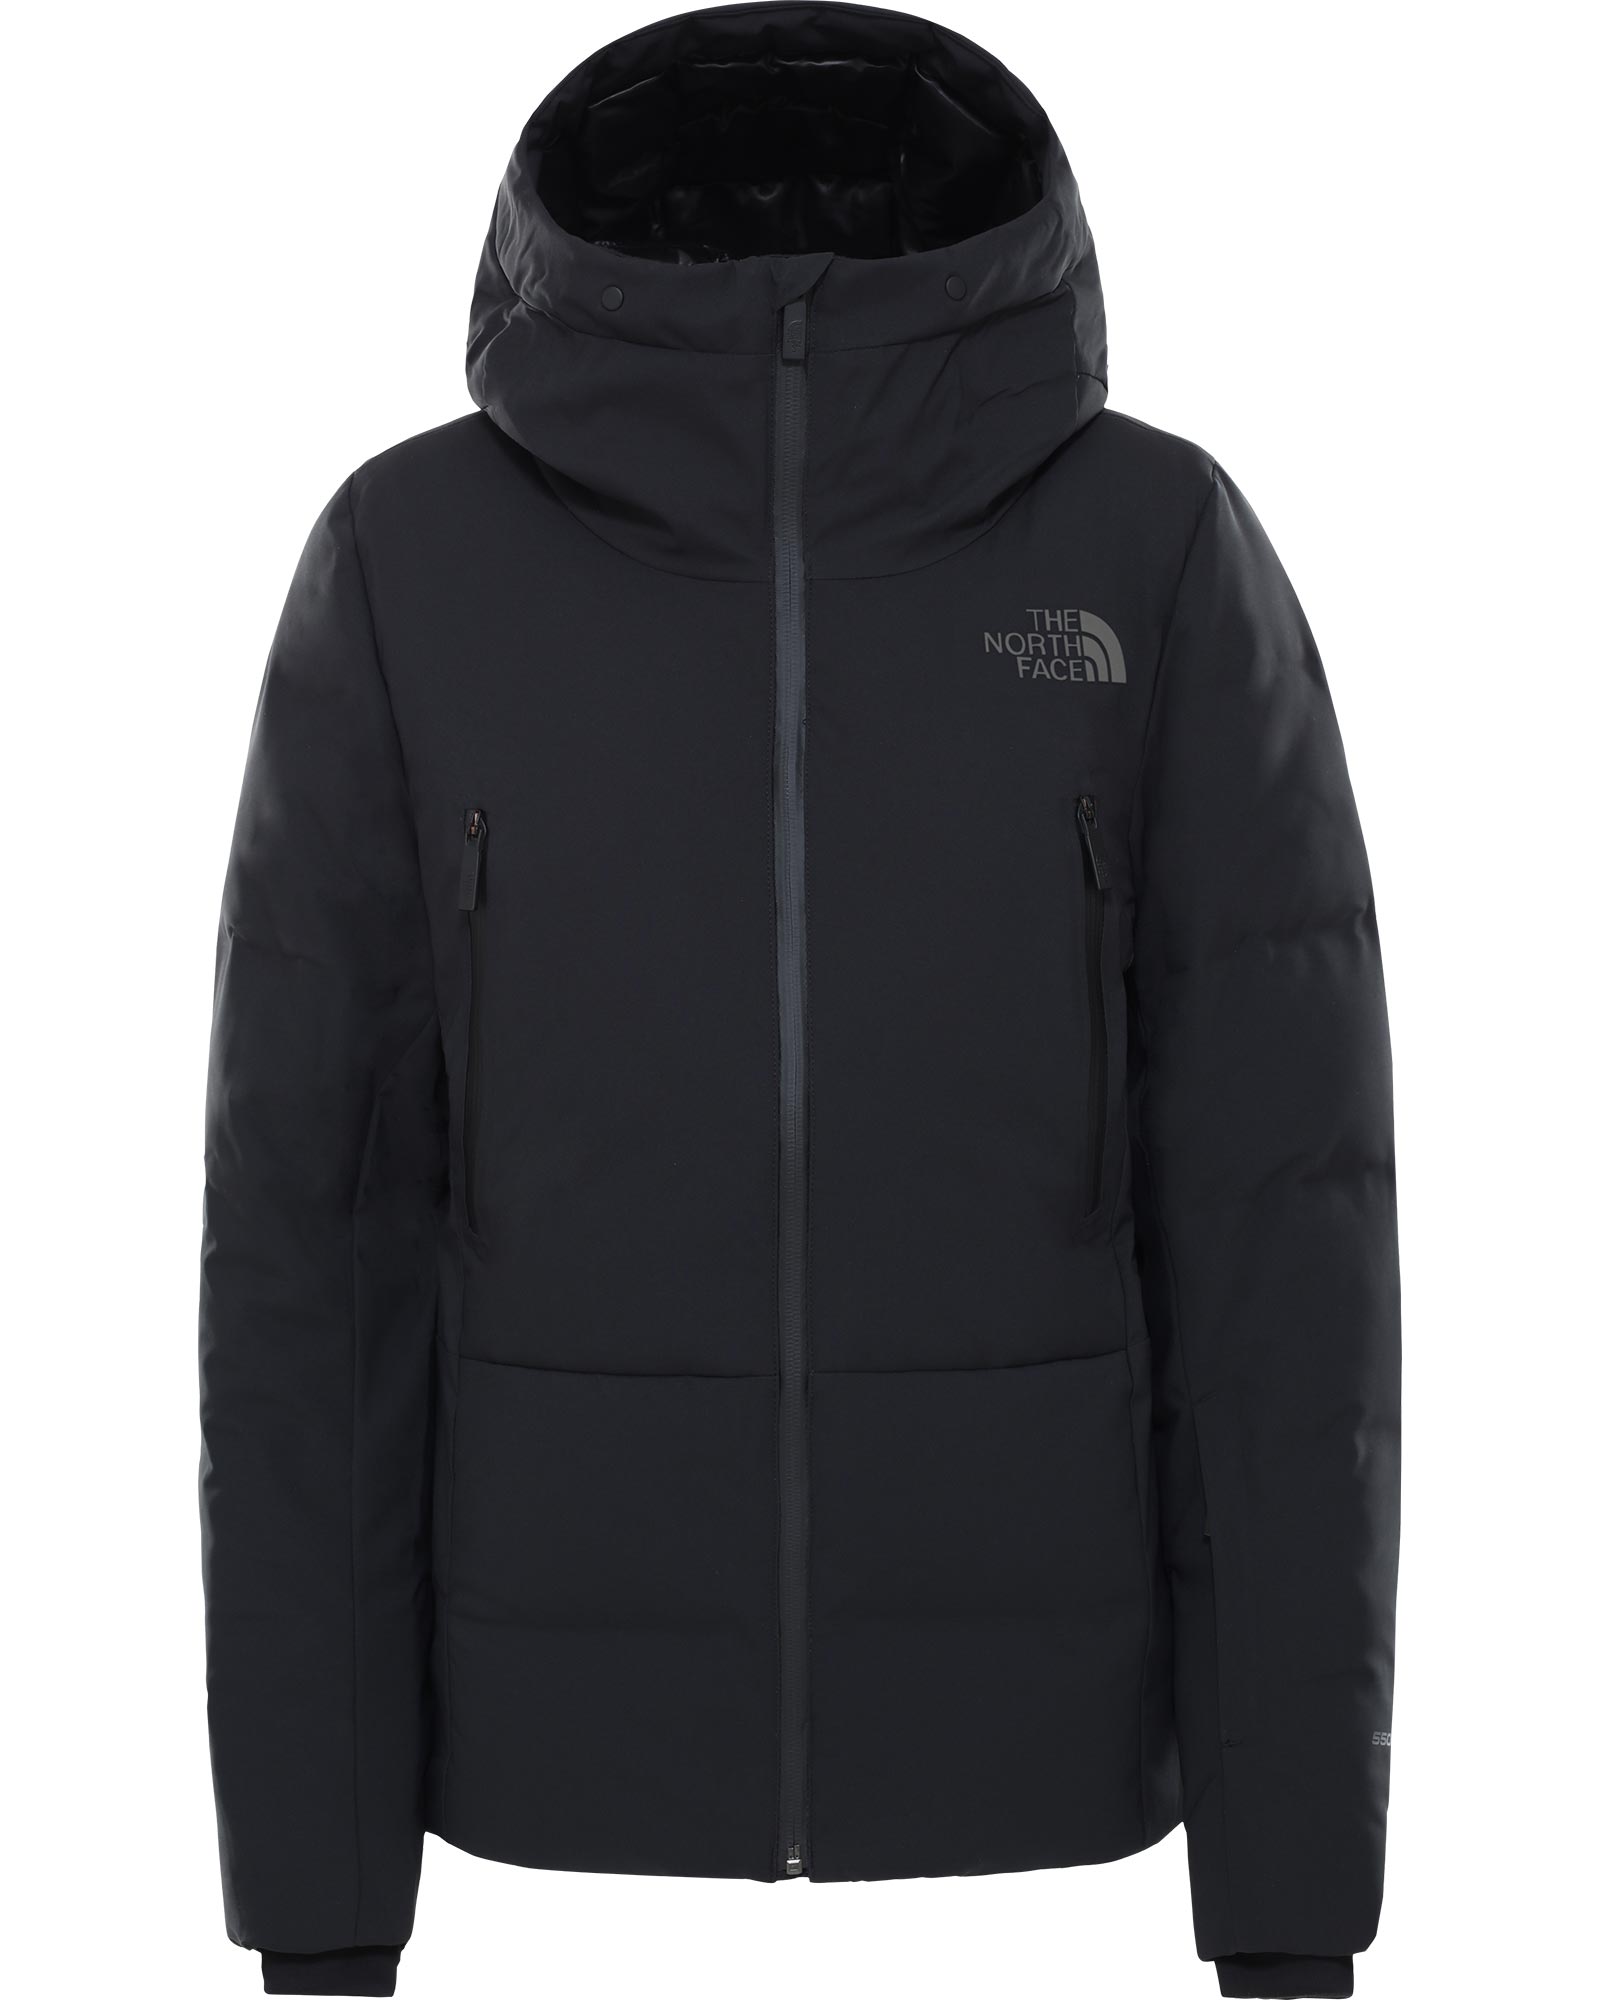 The North Face Cirque Down Womens Jacket